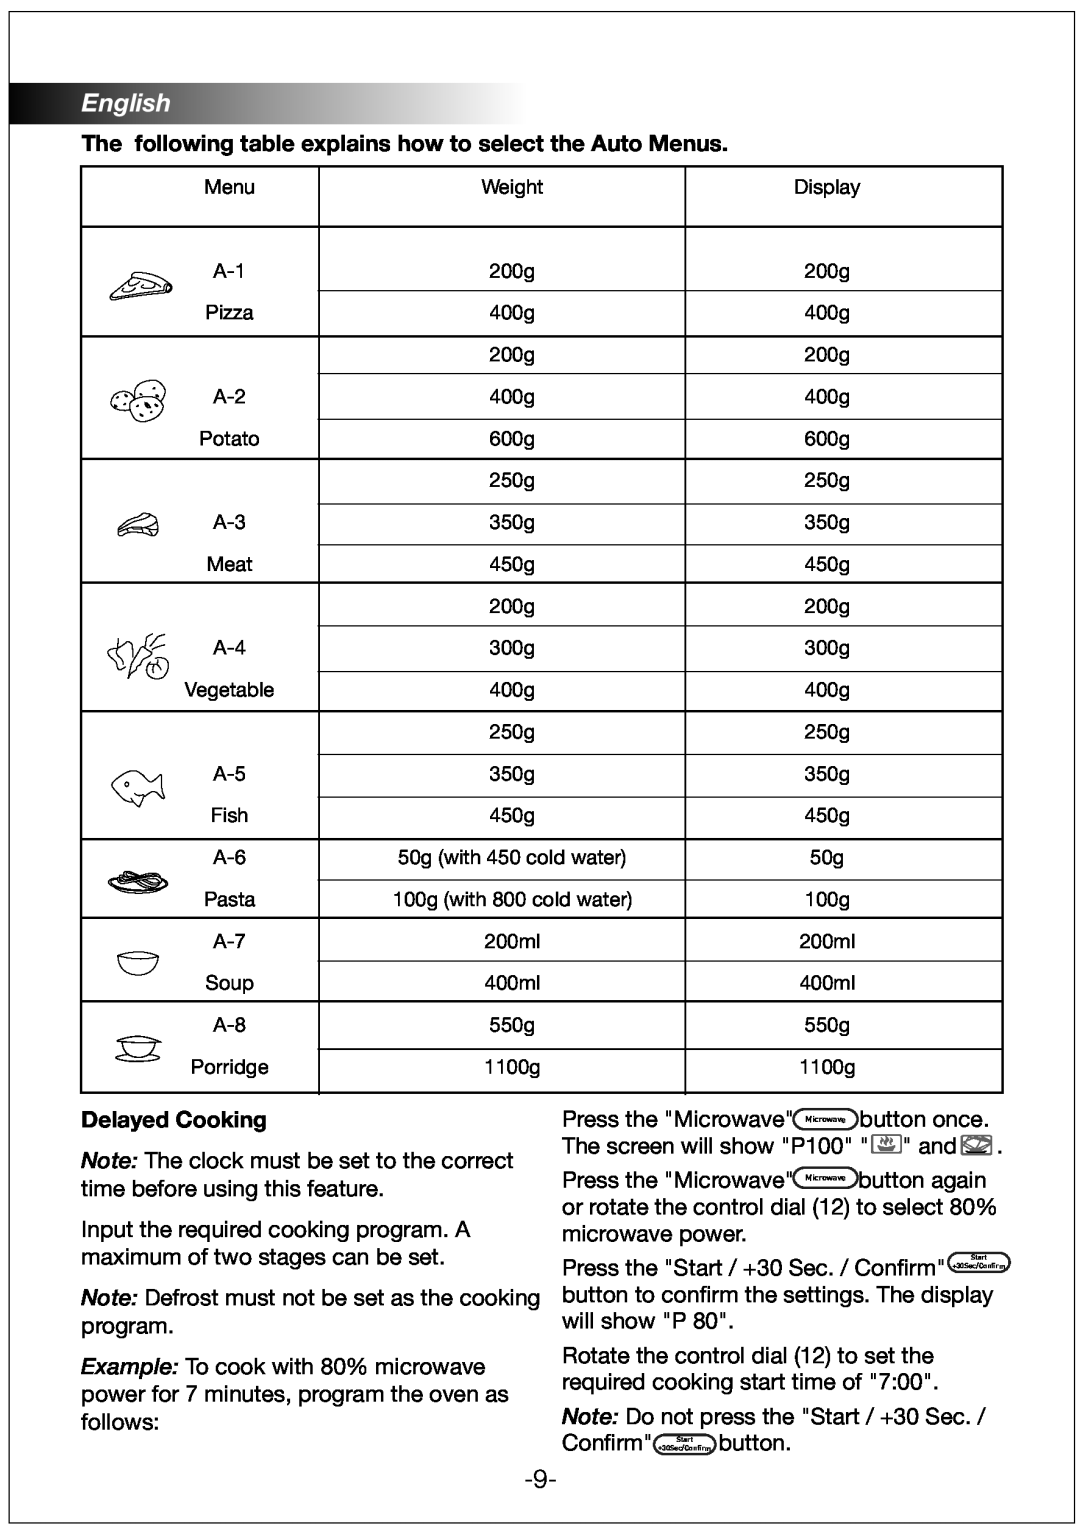 Black & Decker MZ30PGSSI manual English, The following table explains how to select the Auto Menus, Delayed Cooking 